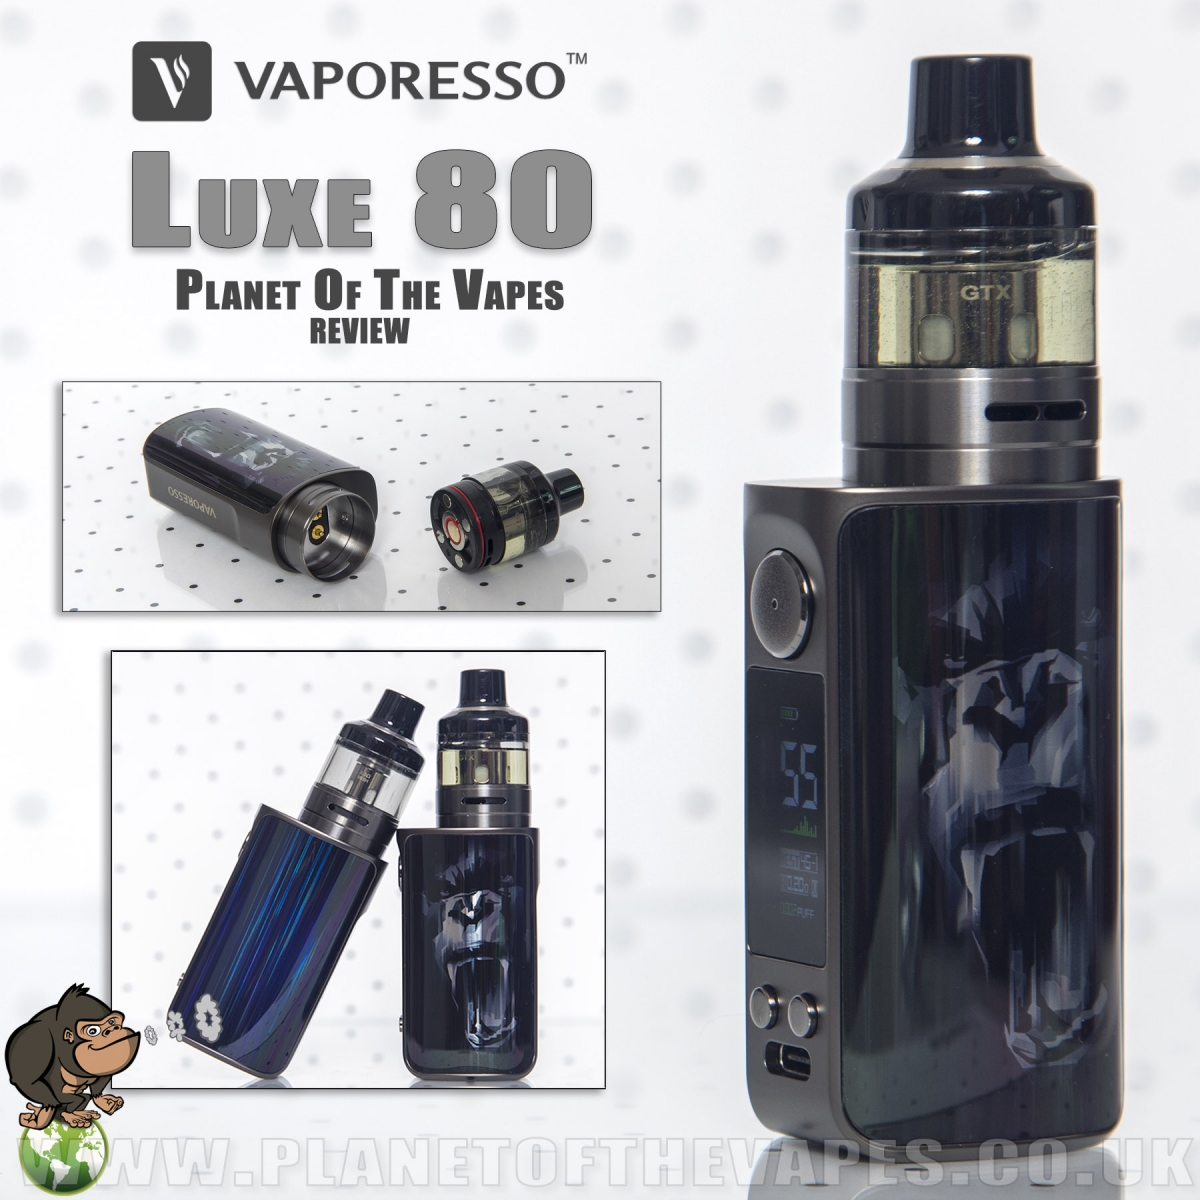 Vaporesso LUXE 80 review